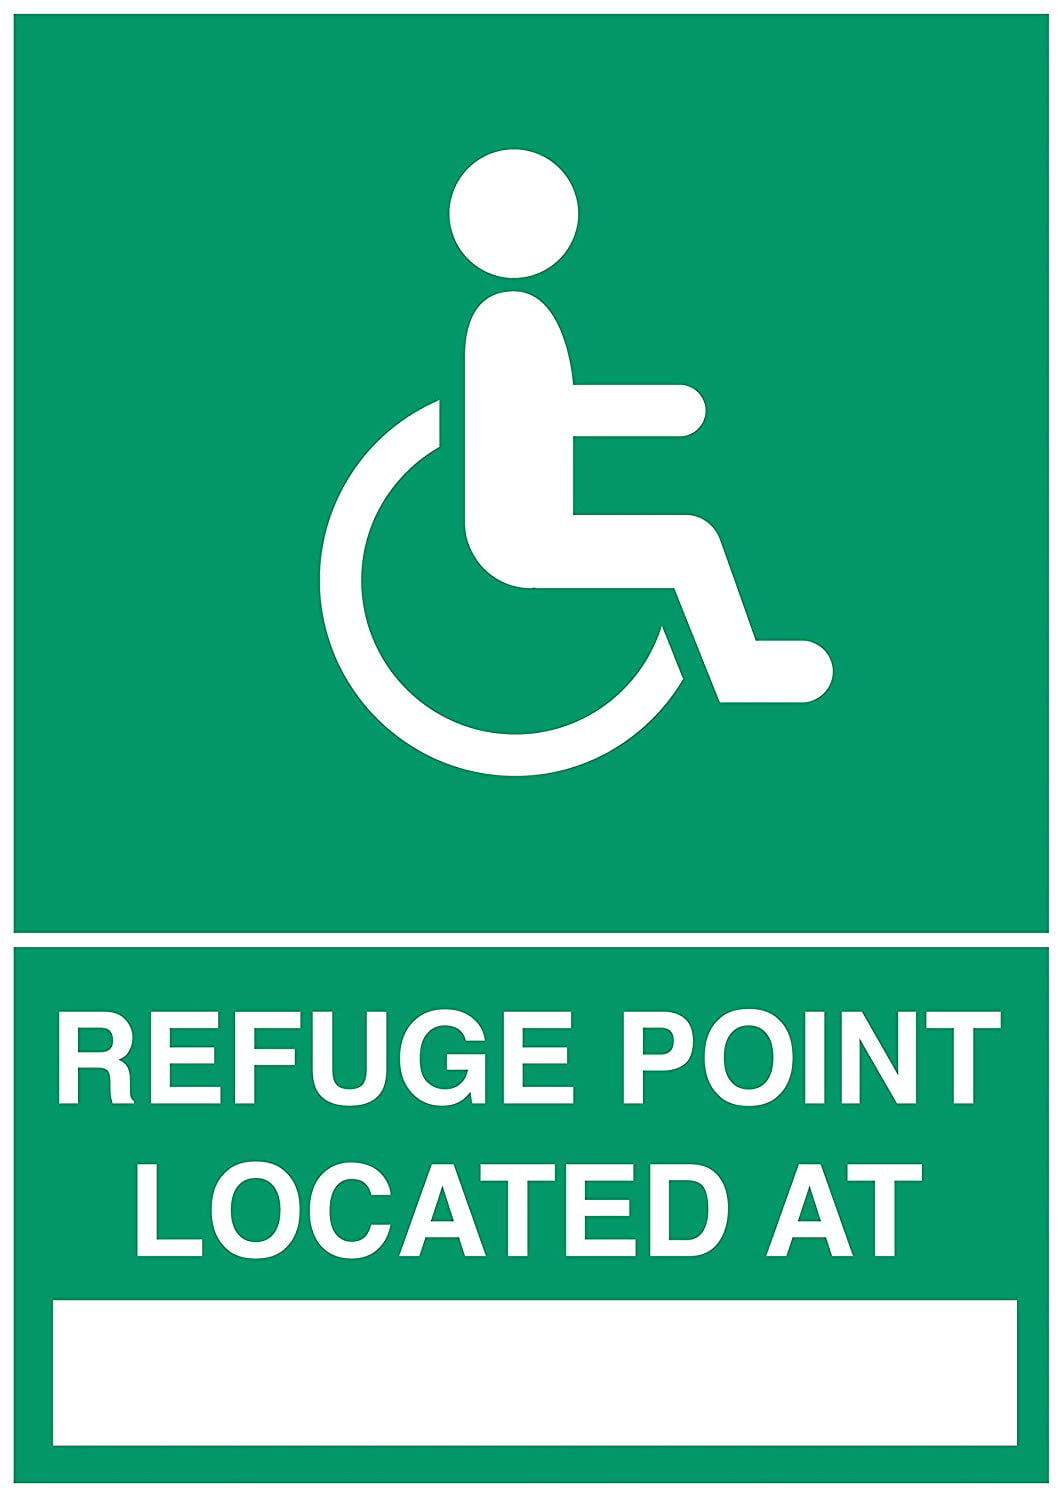 SAFETY SIGN Emergency Refuge Point Adhesive Waterproof Vinyl Sticker Quality 